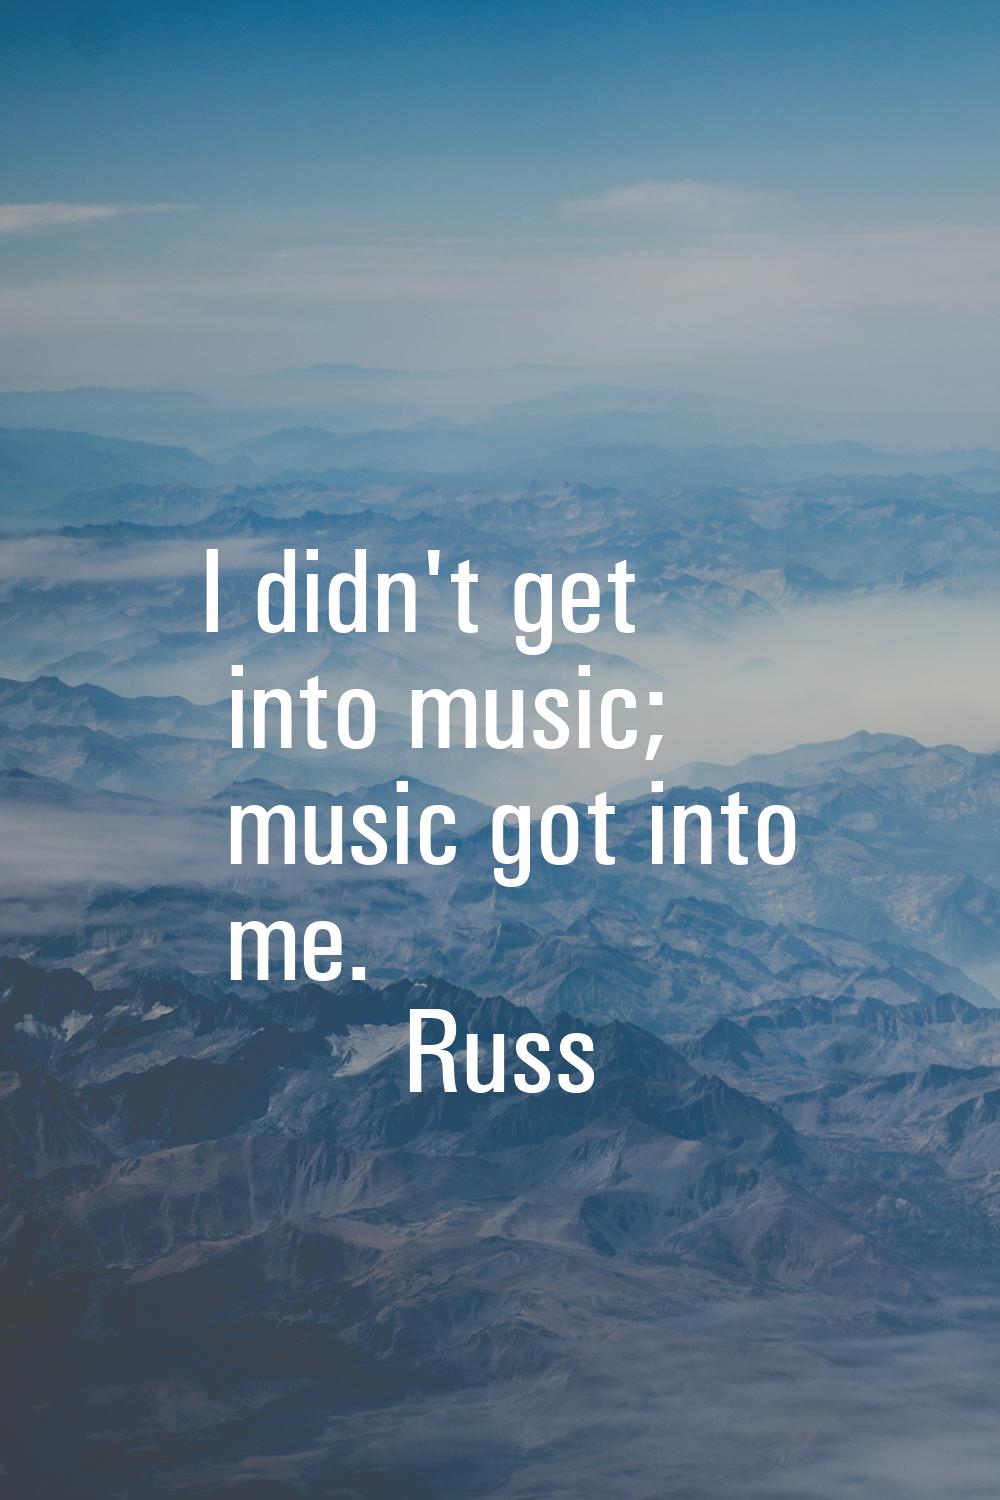 I didn't get into music; music got into me.